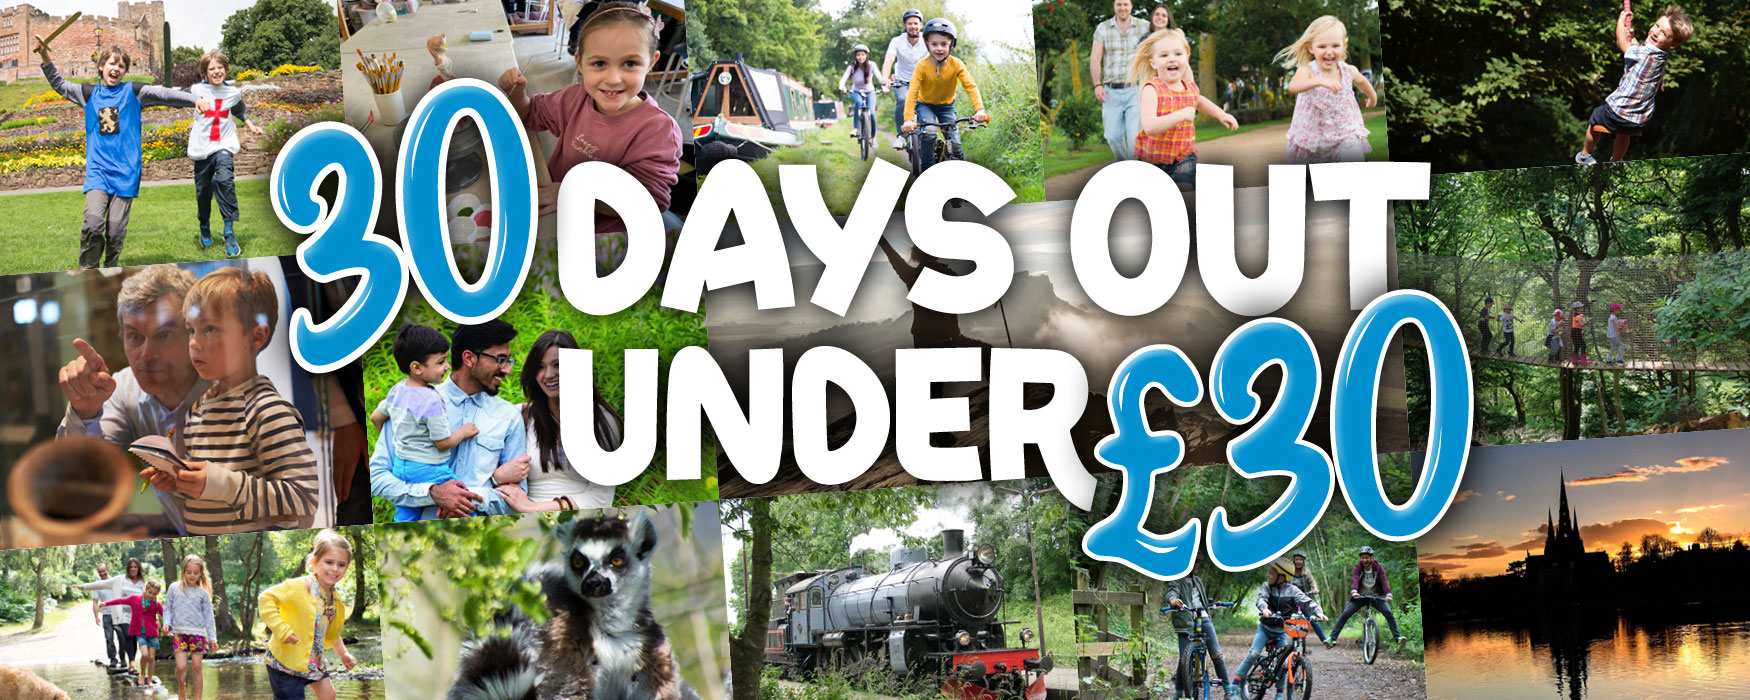 Infographic depicting 30 Days Out in Staffordshire for under £30